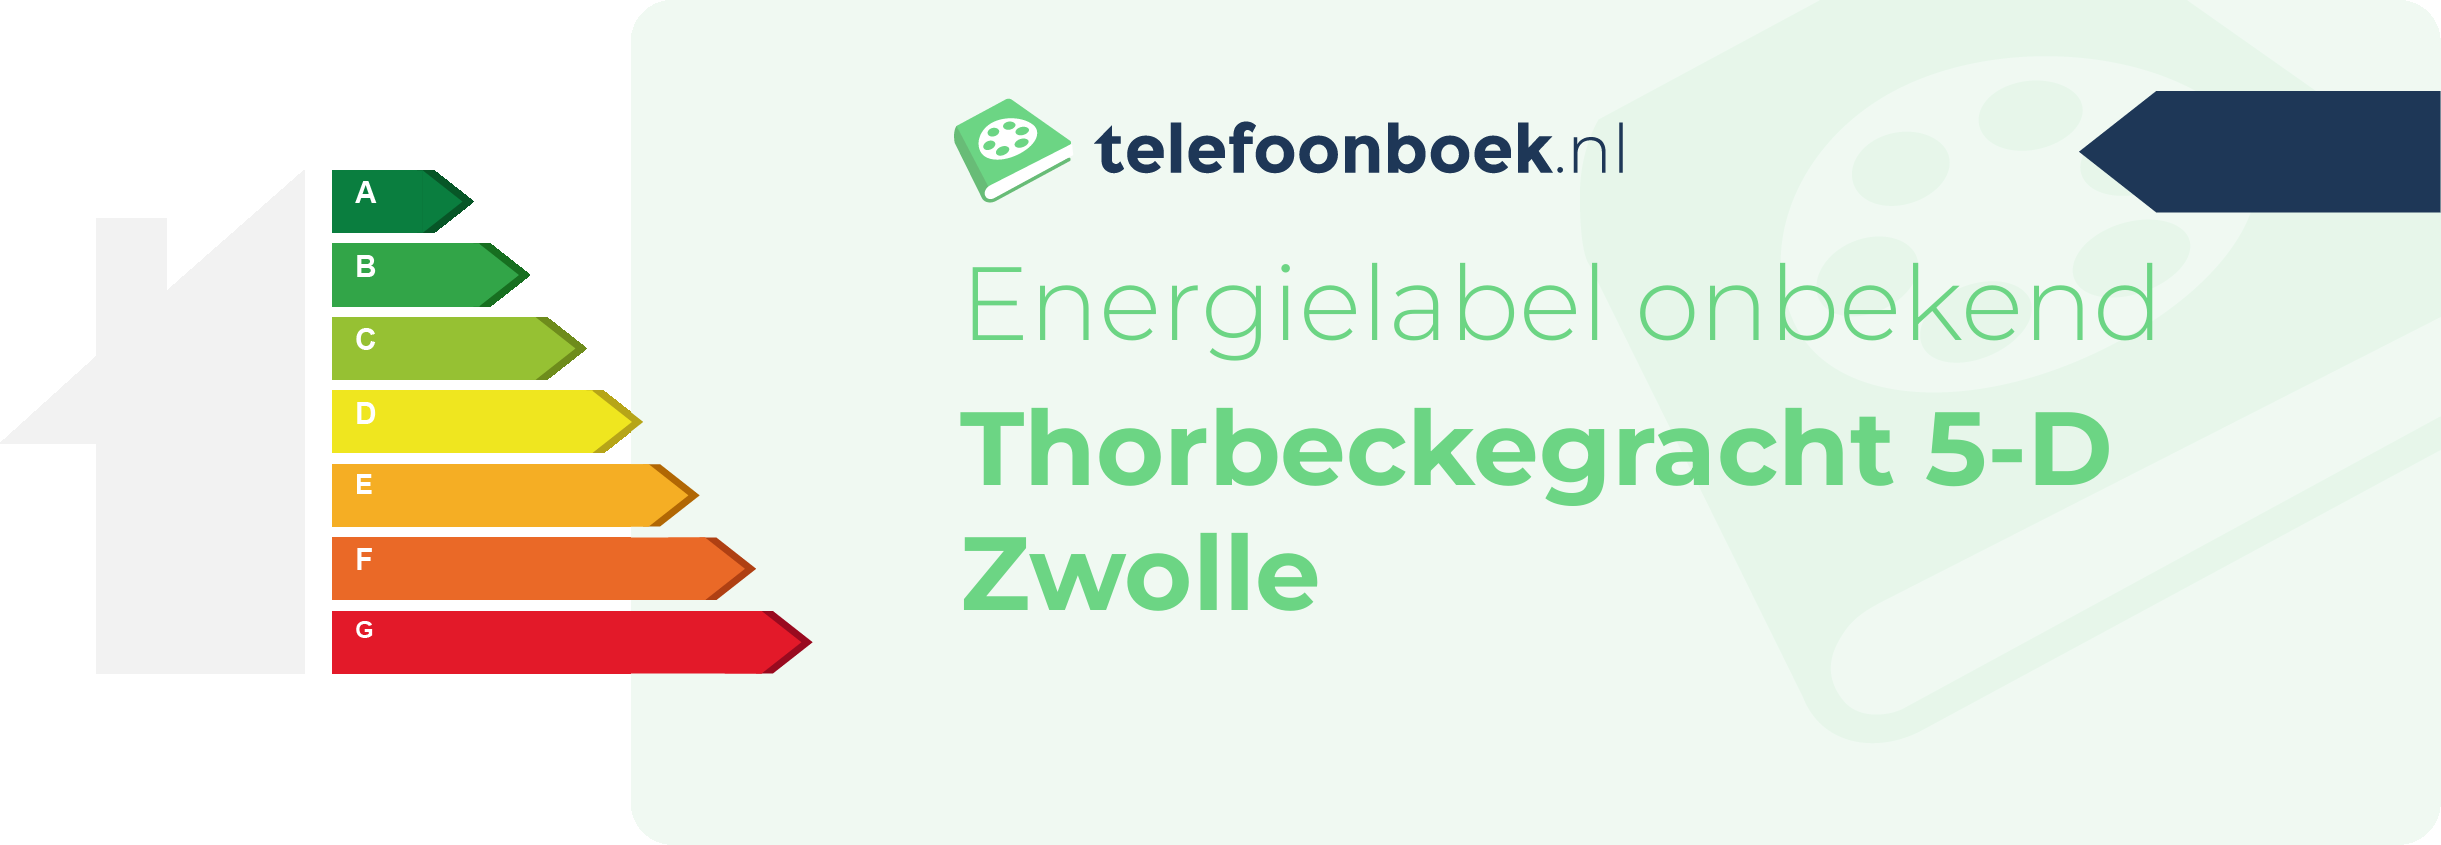 Energielabel Thorbeckegracht 5-D Zwolle